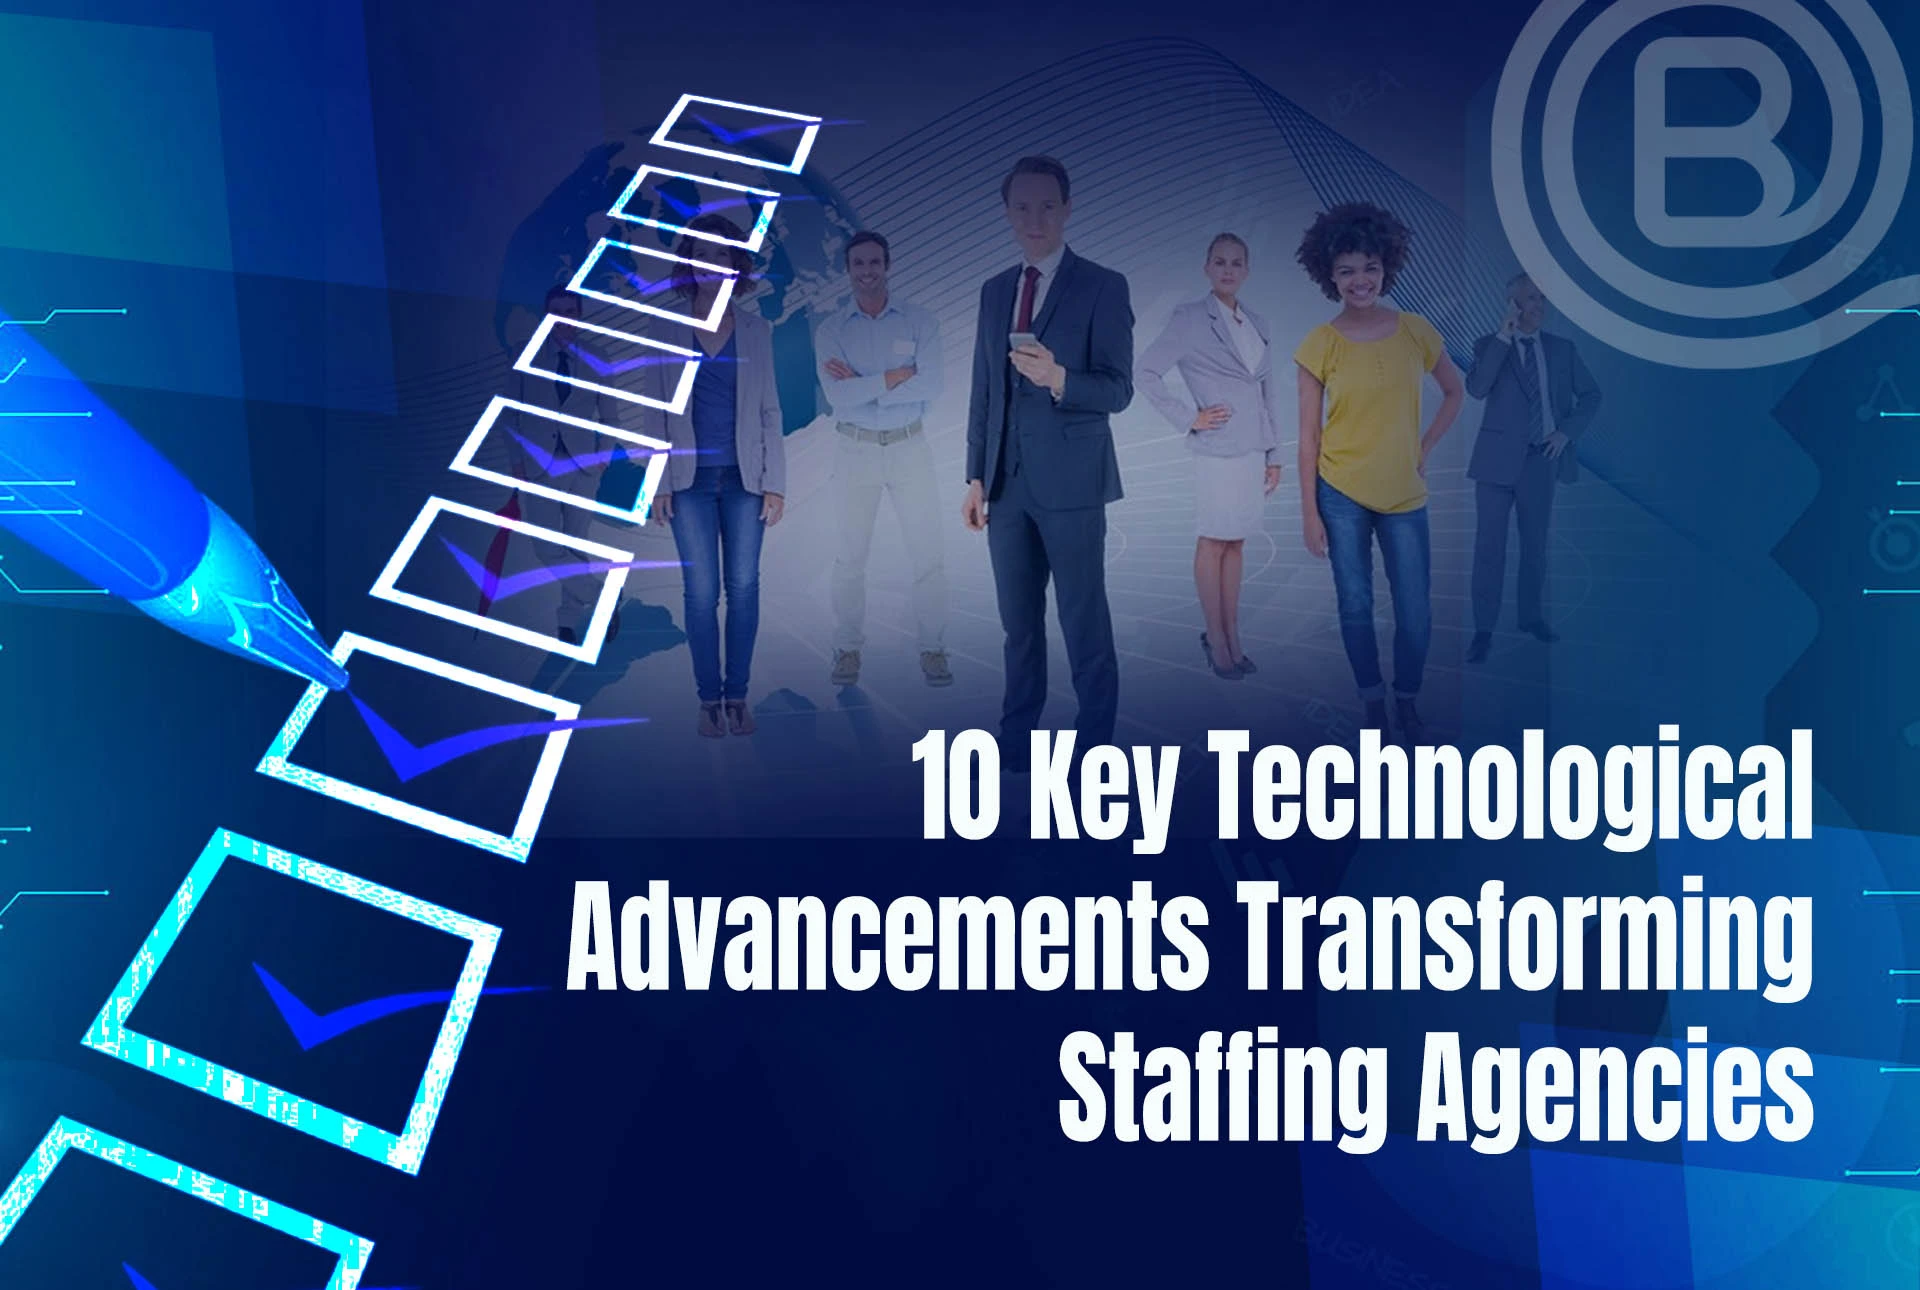 10 Key Technological Advancements Transforming Staffing Agencies